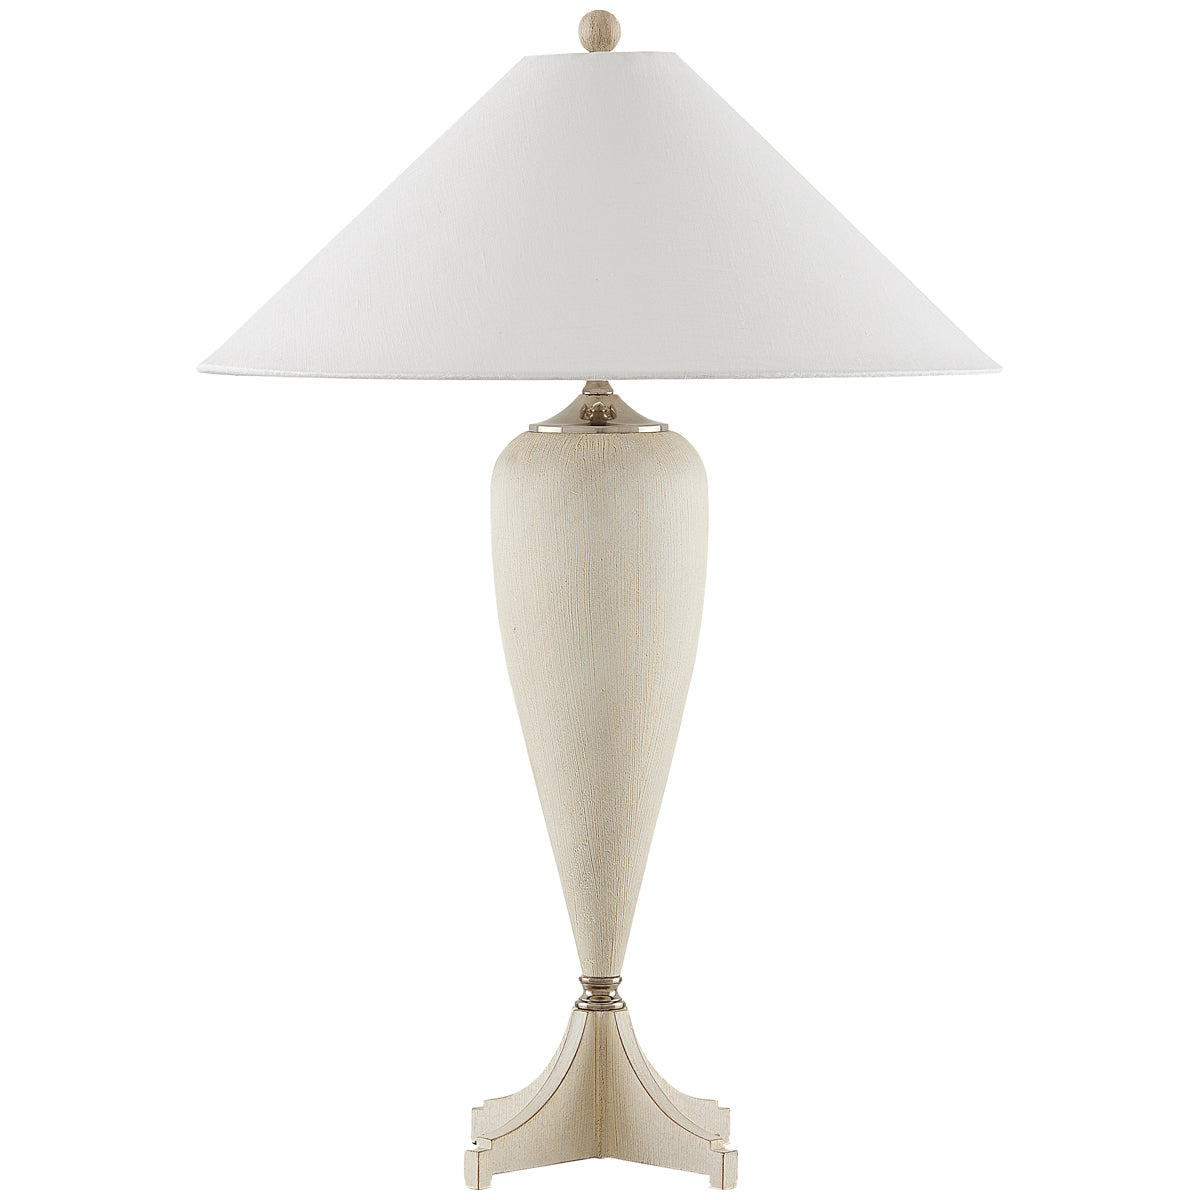 Currey and Company Hastings Table Lamp